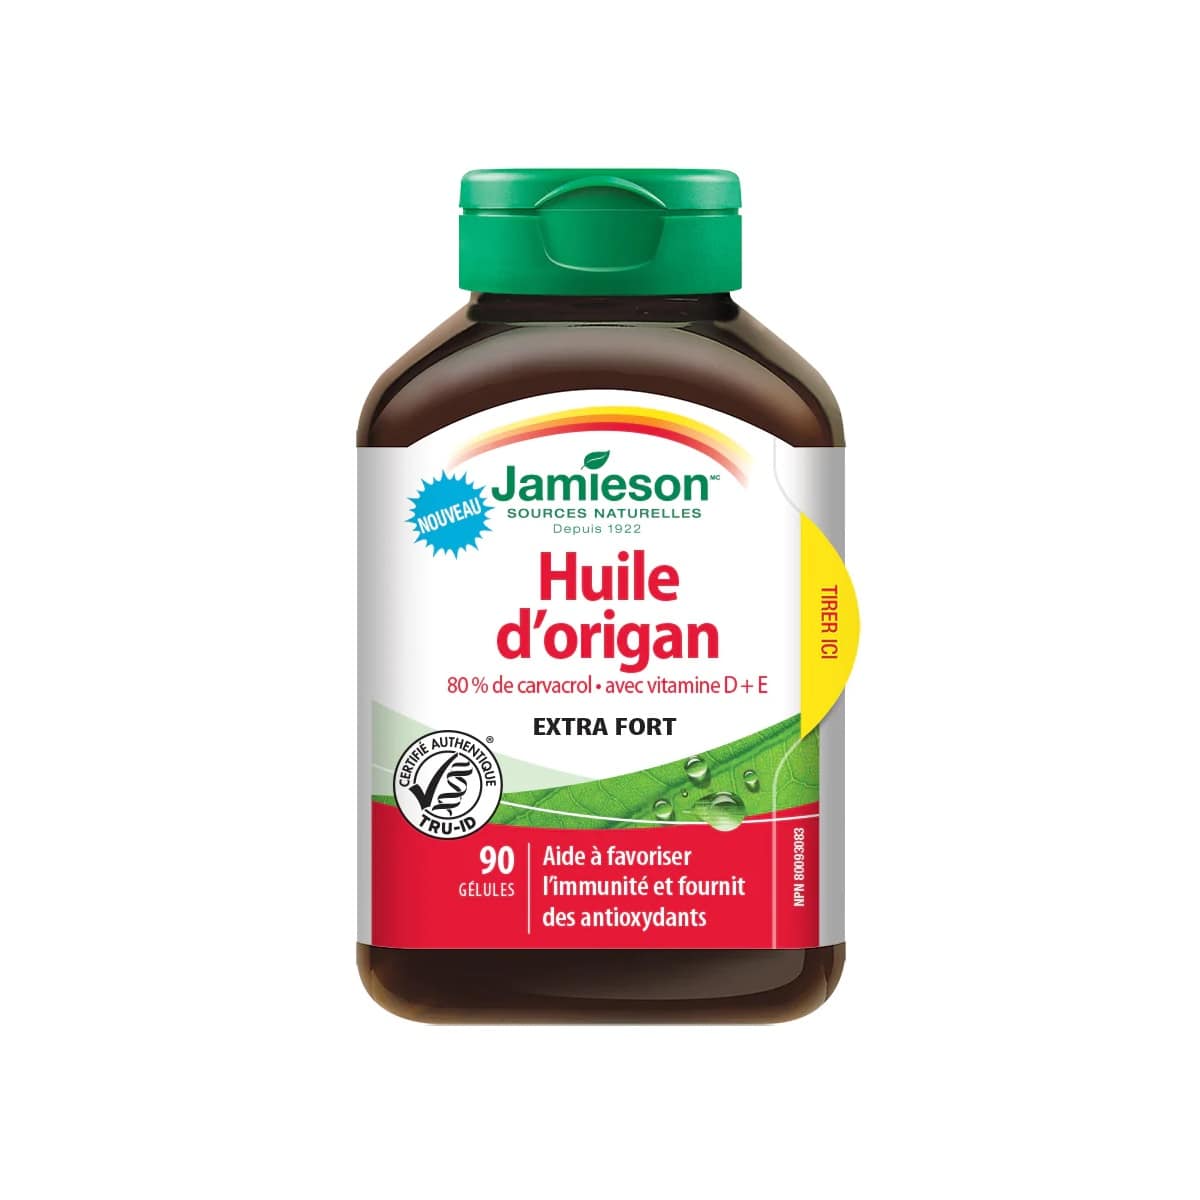 Product label for Jamieson Oregano Oil with Vitamin D and E (90 softgels) in French